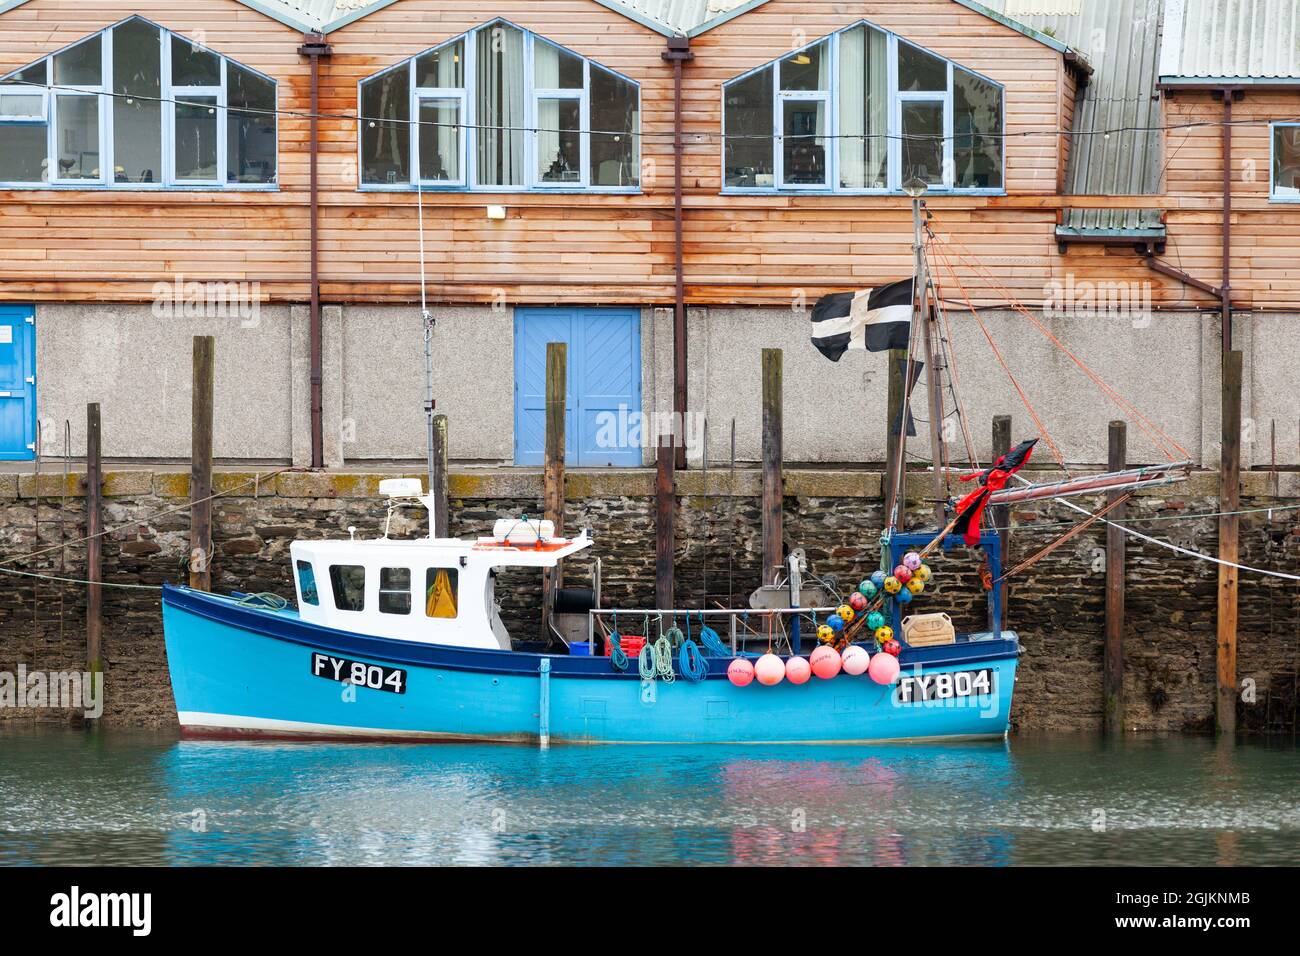 Fising boat with Cornish flag at East Looe quay Cornwall Stock Photo